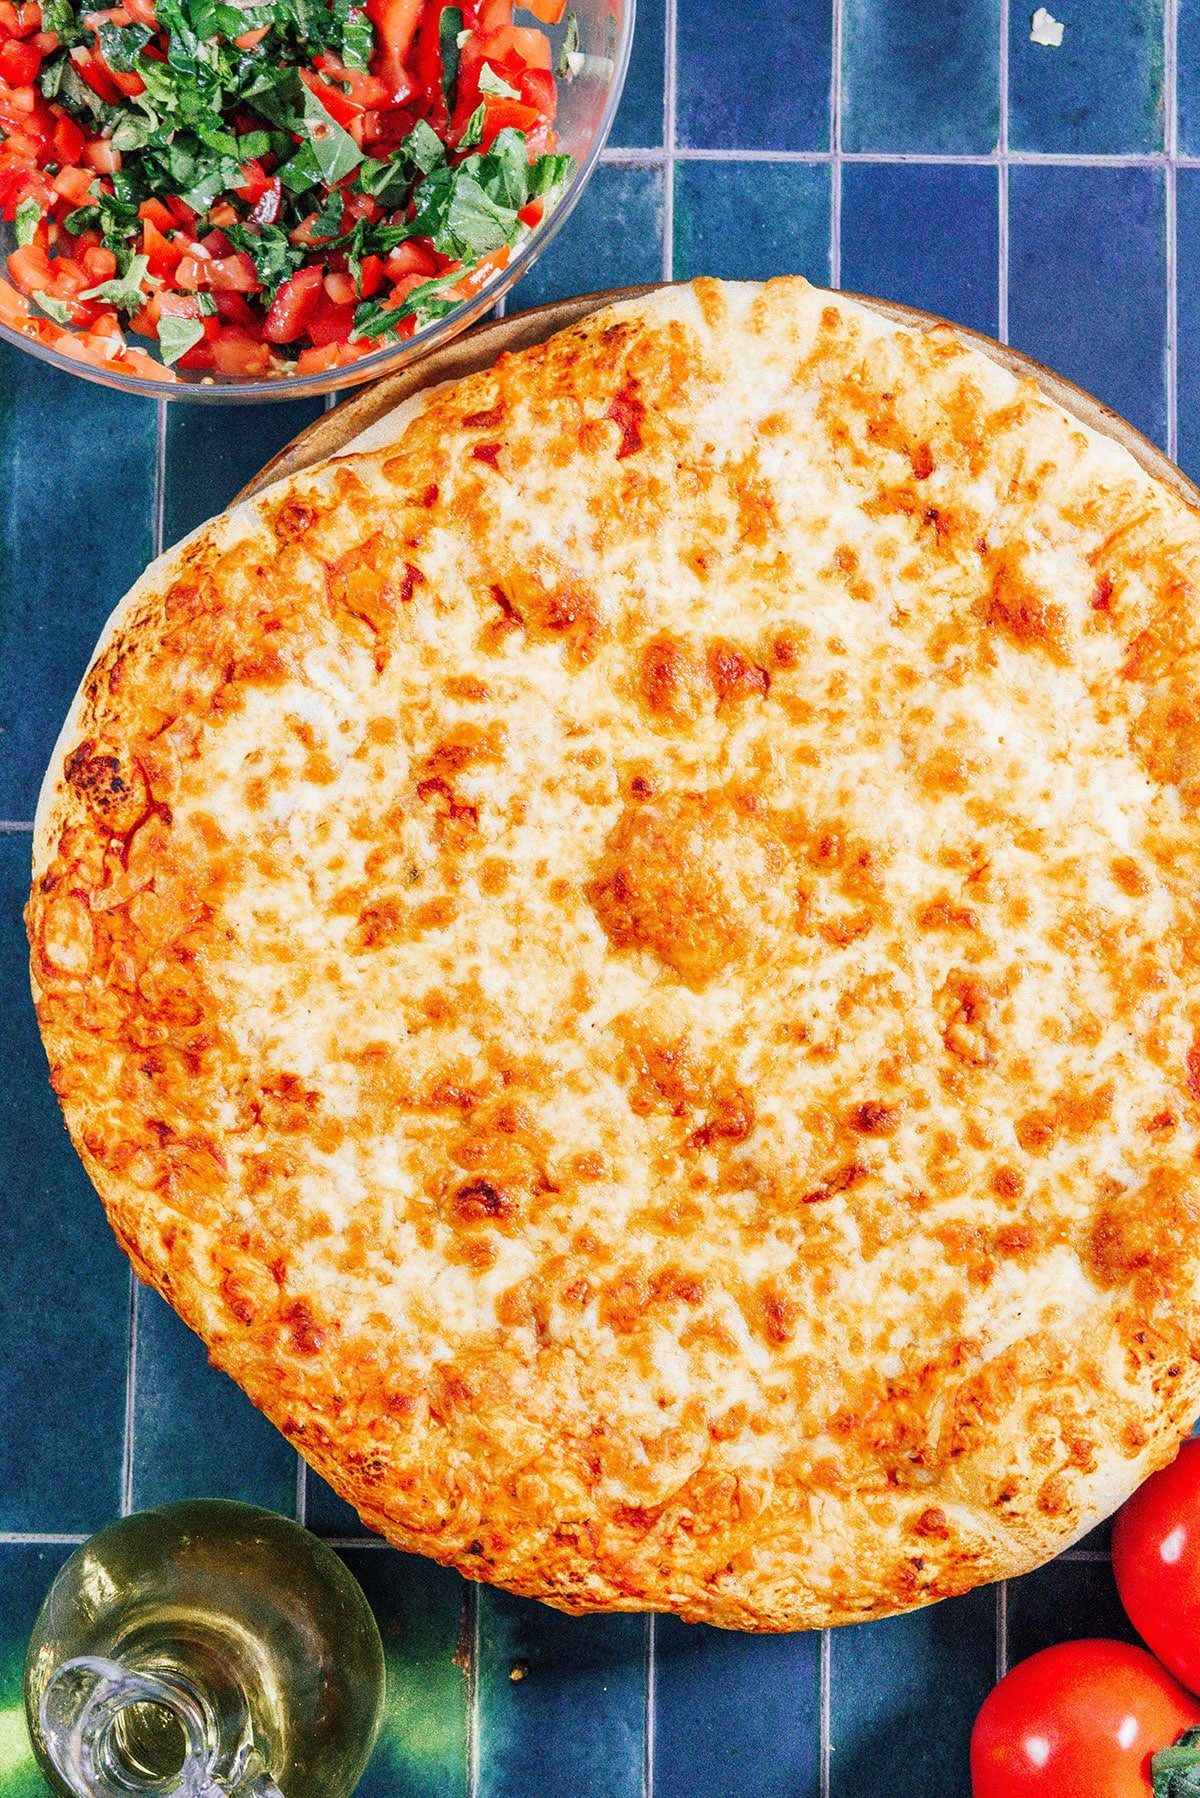 Cheese pizza on a blue tile background.